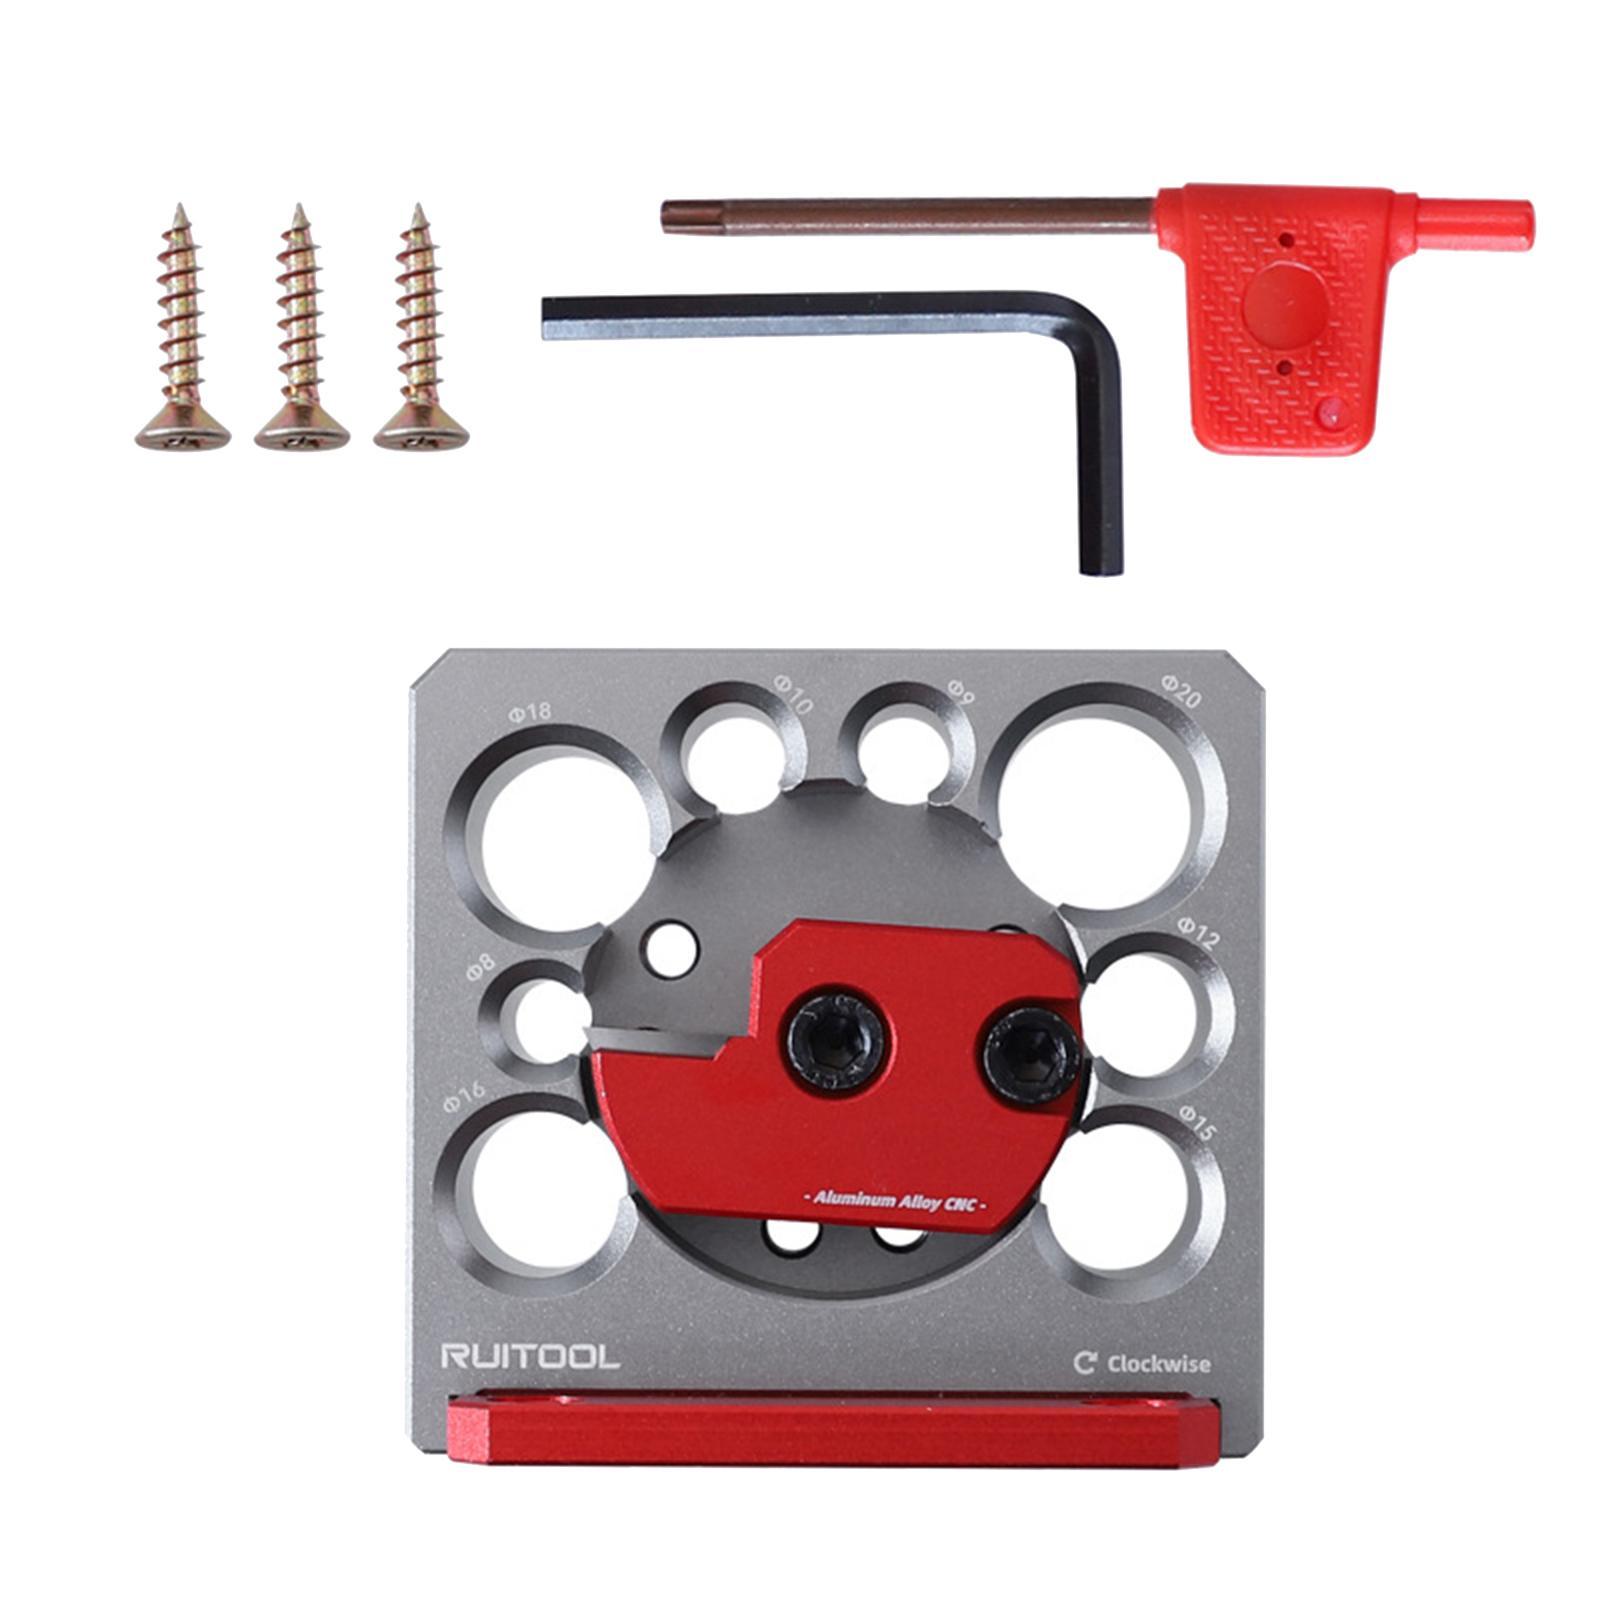 Adjustable Dowel Maker Jig Kits Woodworking Tools 8 Holes Wooden Dowel Electric Drill Milling Dowel for Electric Drill Dowel Rods